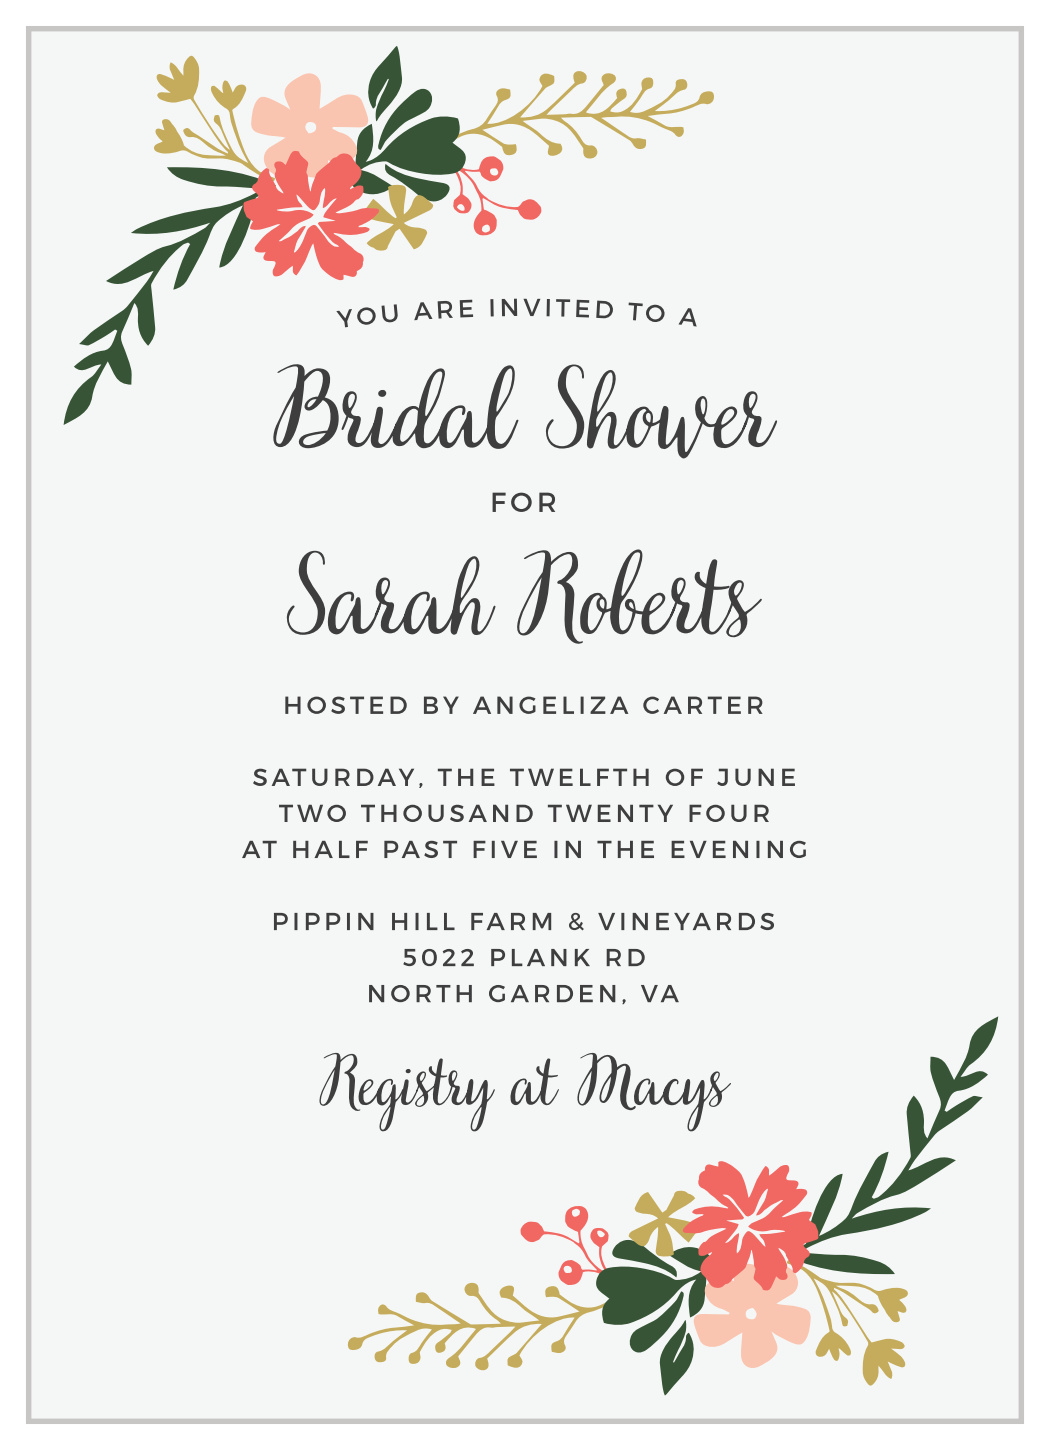 Colorful Floral Bridal Shower Invitation Template Wildflower 